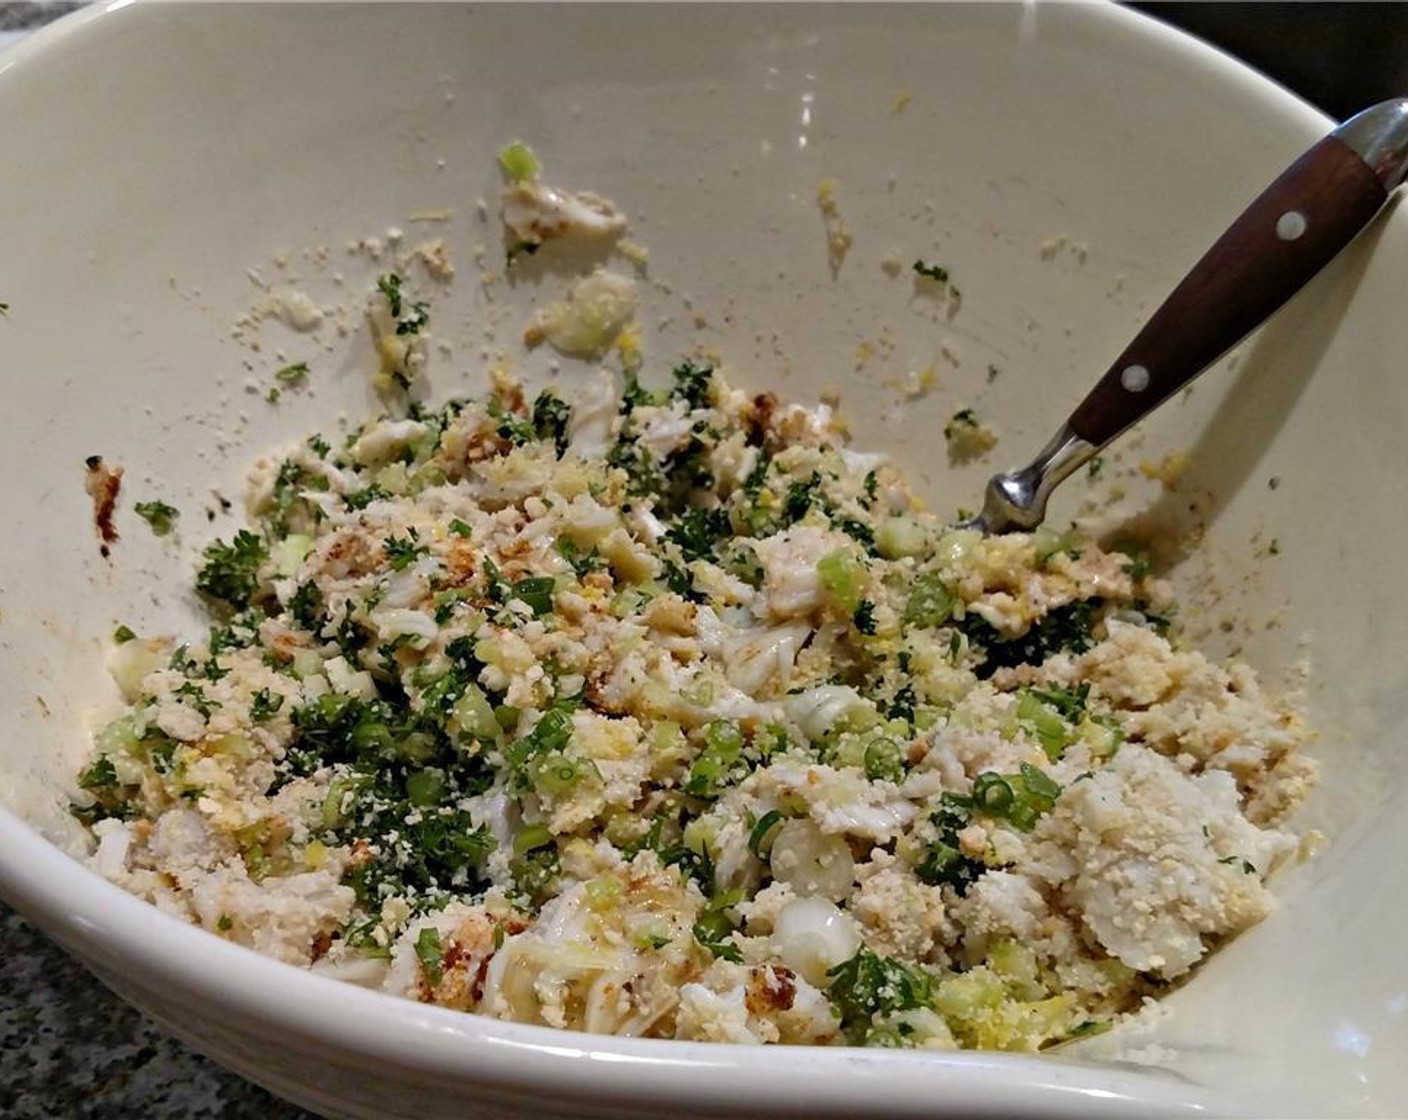 step 2 In a large bowl, mix Celery (1/2 cup), Scallion (1/2 cup), {@11:}, Lemon (1), Gluten-Free Bread (1 cup), Fresh Parsley (1/2 cup), Mayonnaise (1/3 cup), Worcestershire Sauce (1 tsp), Old Bay® Seasoning (1 tsp), Dijon Mustard (1 tsp), {@10:}, and Ground White Pepper (1/4 tsp). Carefully add the crab last, taking care not to break up the lumps as you incorporate it.